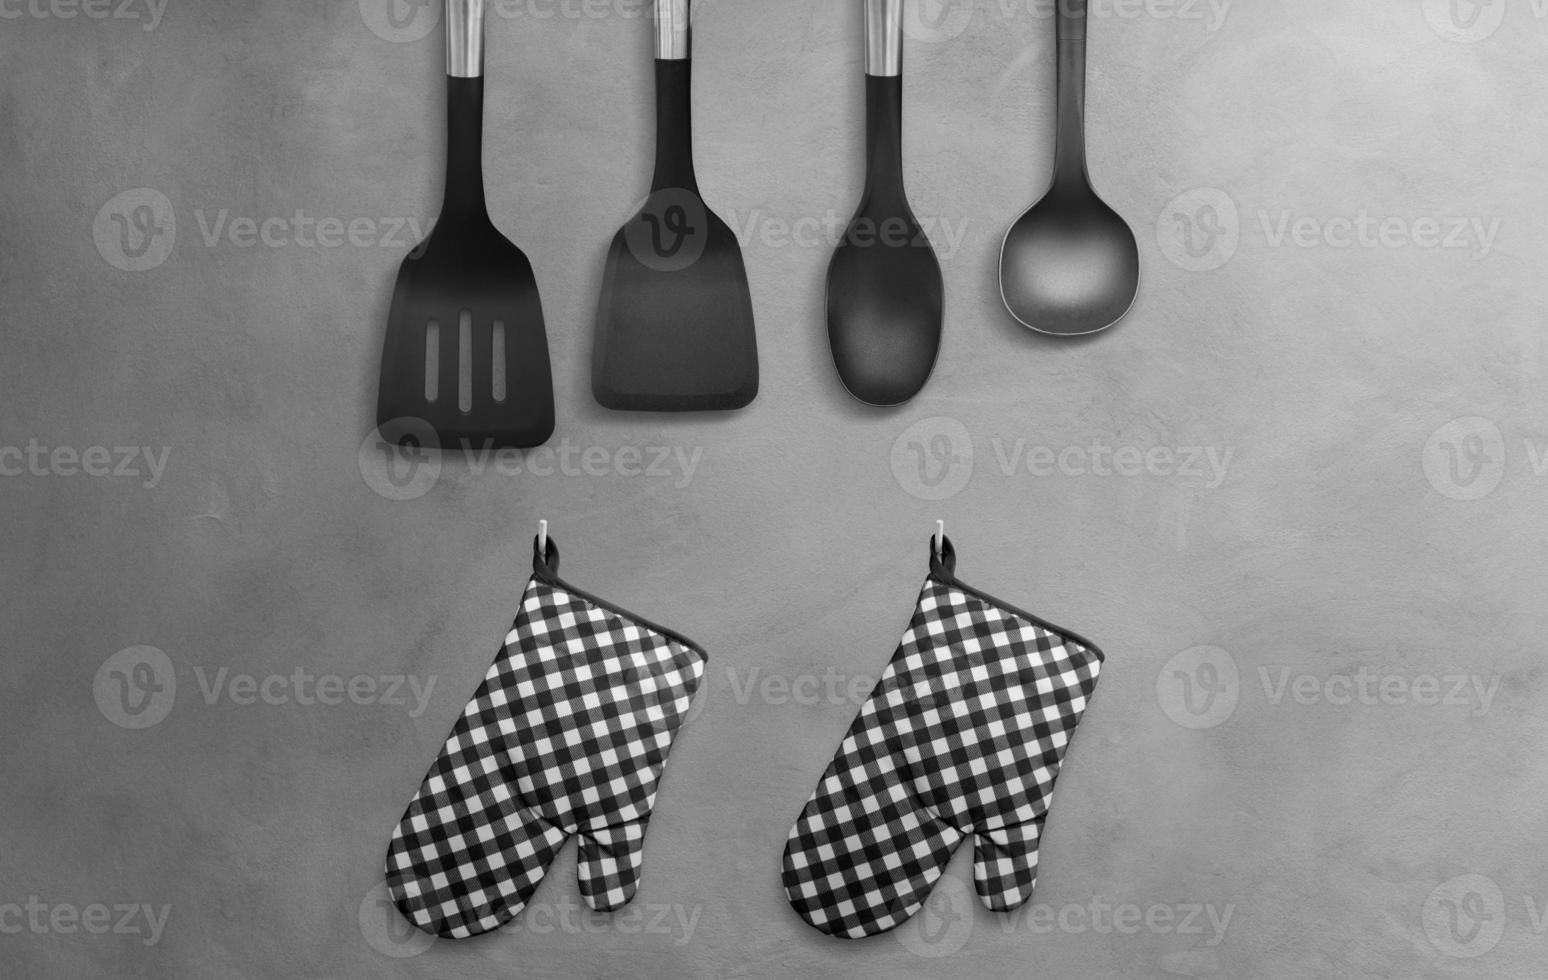 Black heat resistant cooking gloves with kitchen utensils hanging on a cement wall. photo